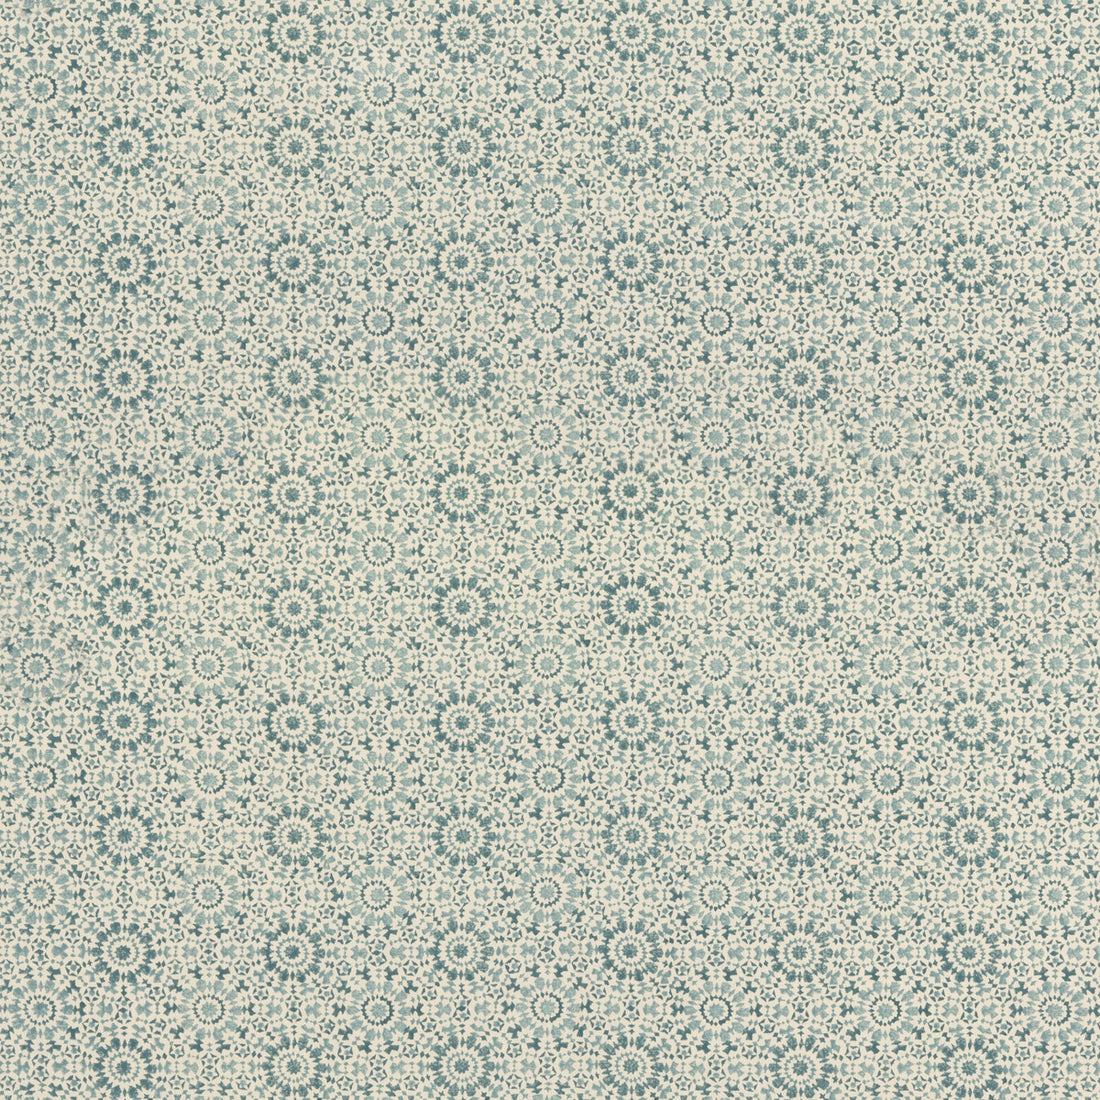 Veryan fabric in aqua color - pattern BP10792.1.0 - by G P &amp; J Baker in the Artisan II collection